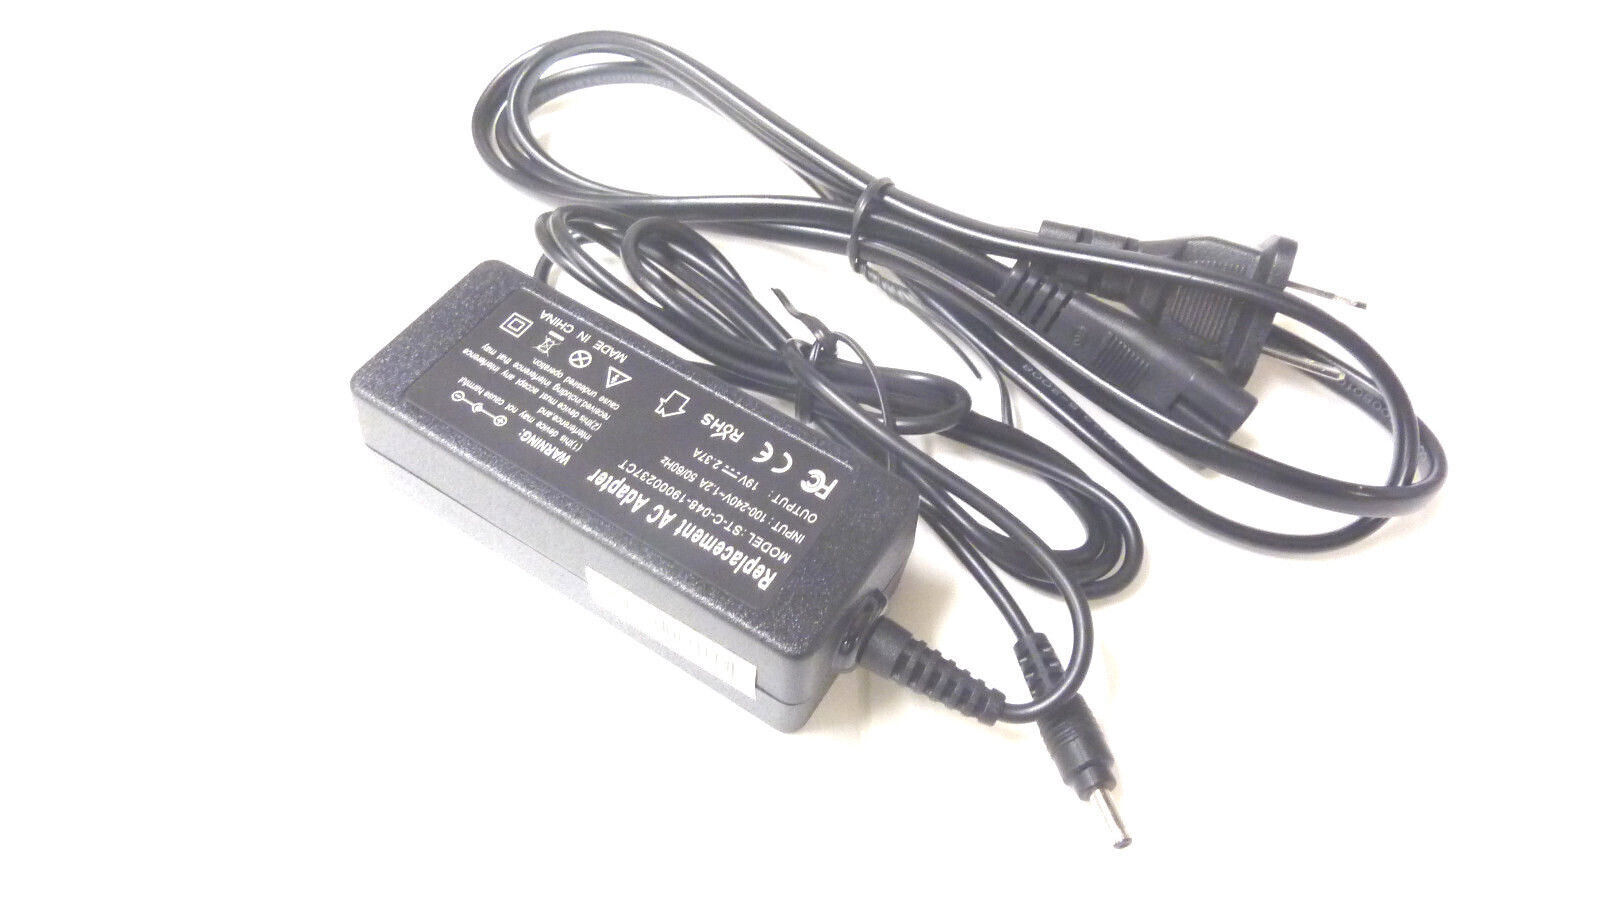 For Acer Aspire 3 A315-24PT-R4U2 N23C3 Laptop Charger AC Power Adapter Cable